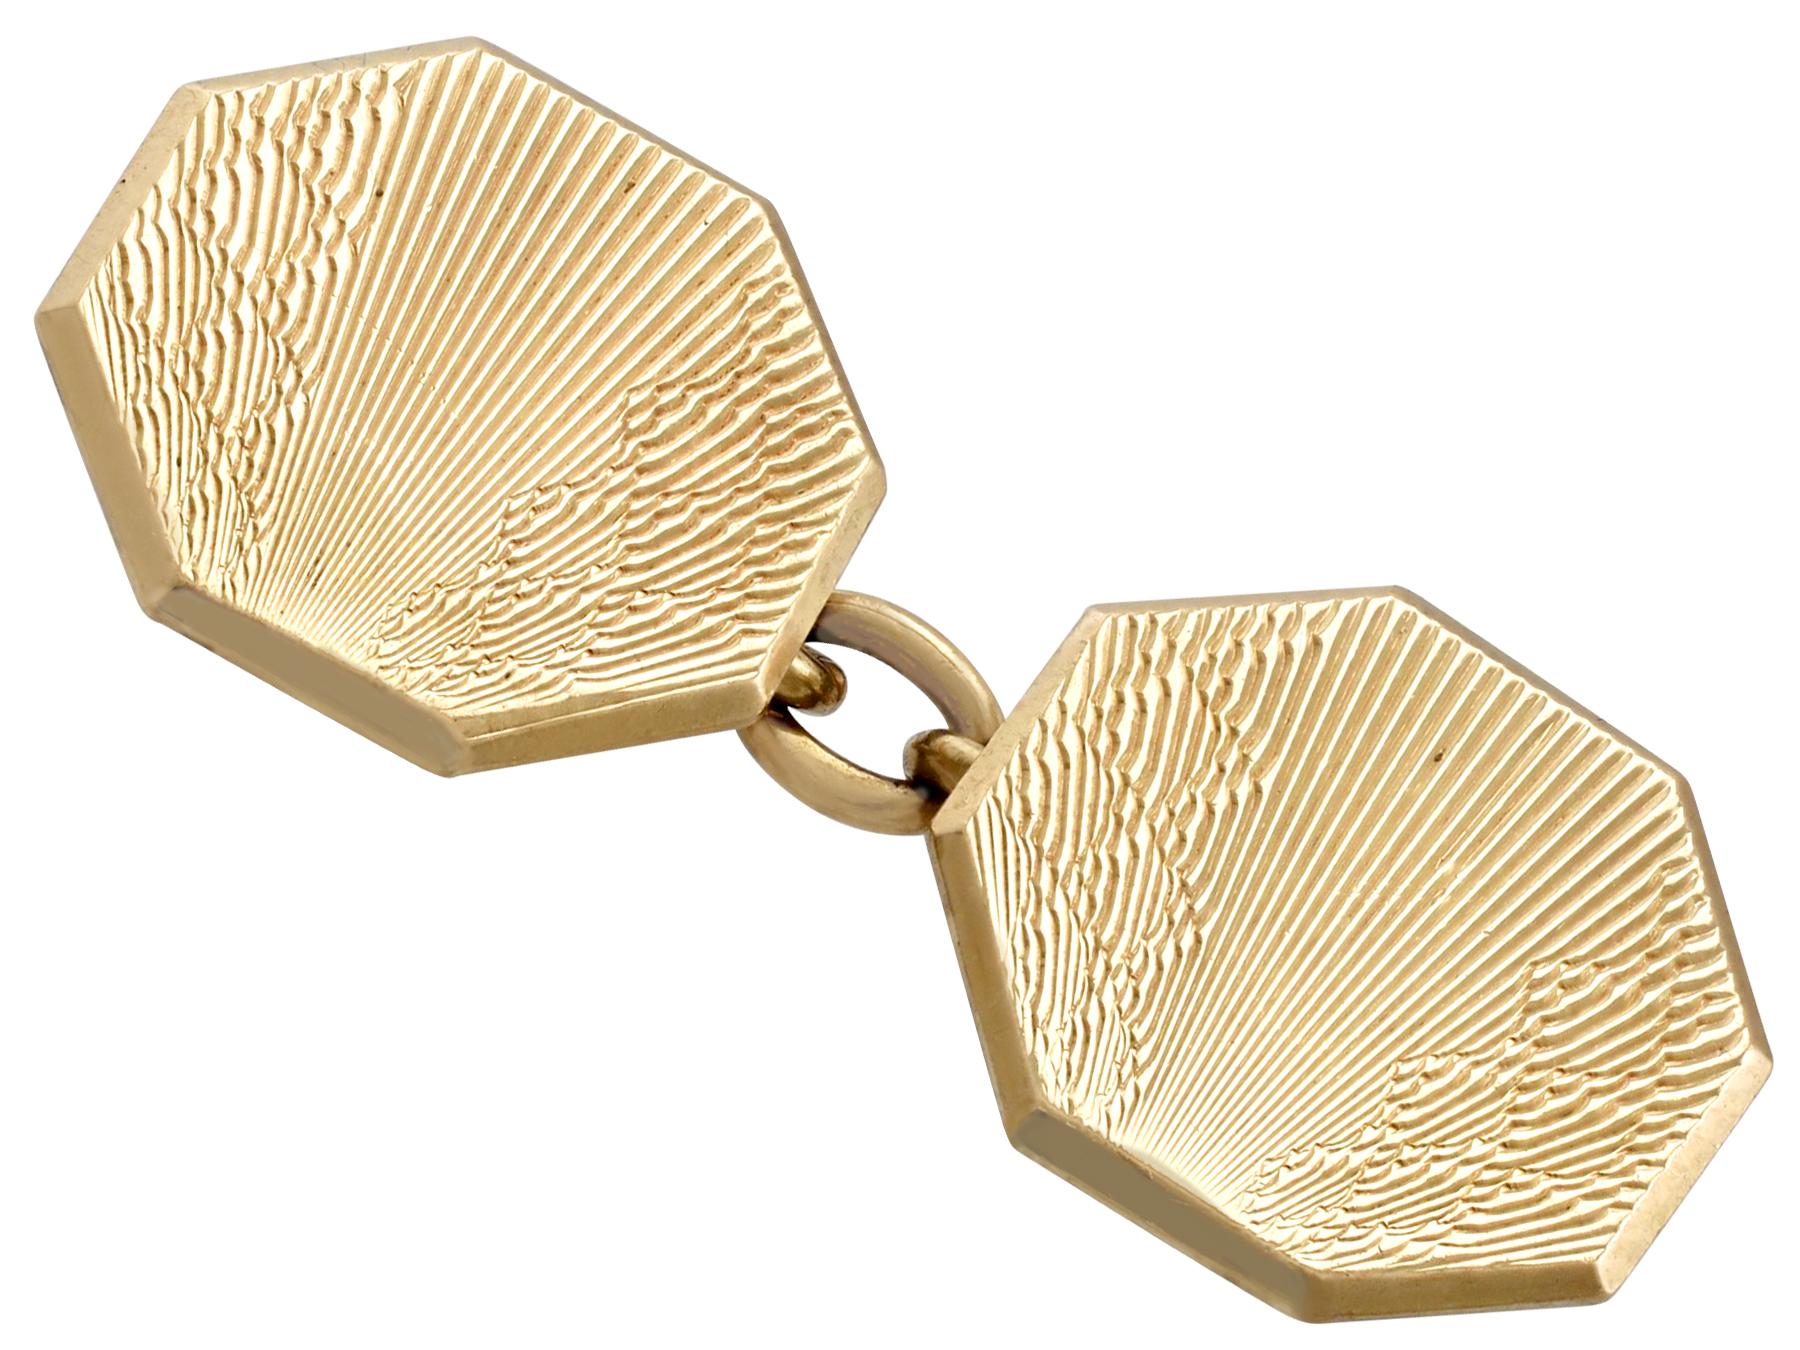 An impressive pair or antique Art Deco 18 karat yellow gold cufflinks; part of our diverse antique jewelry and estate jewelry collections.

These fine and impressive 1920s Art Deco cufflinks have been crafted in 18k yellow gold.

Each link as an